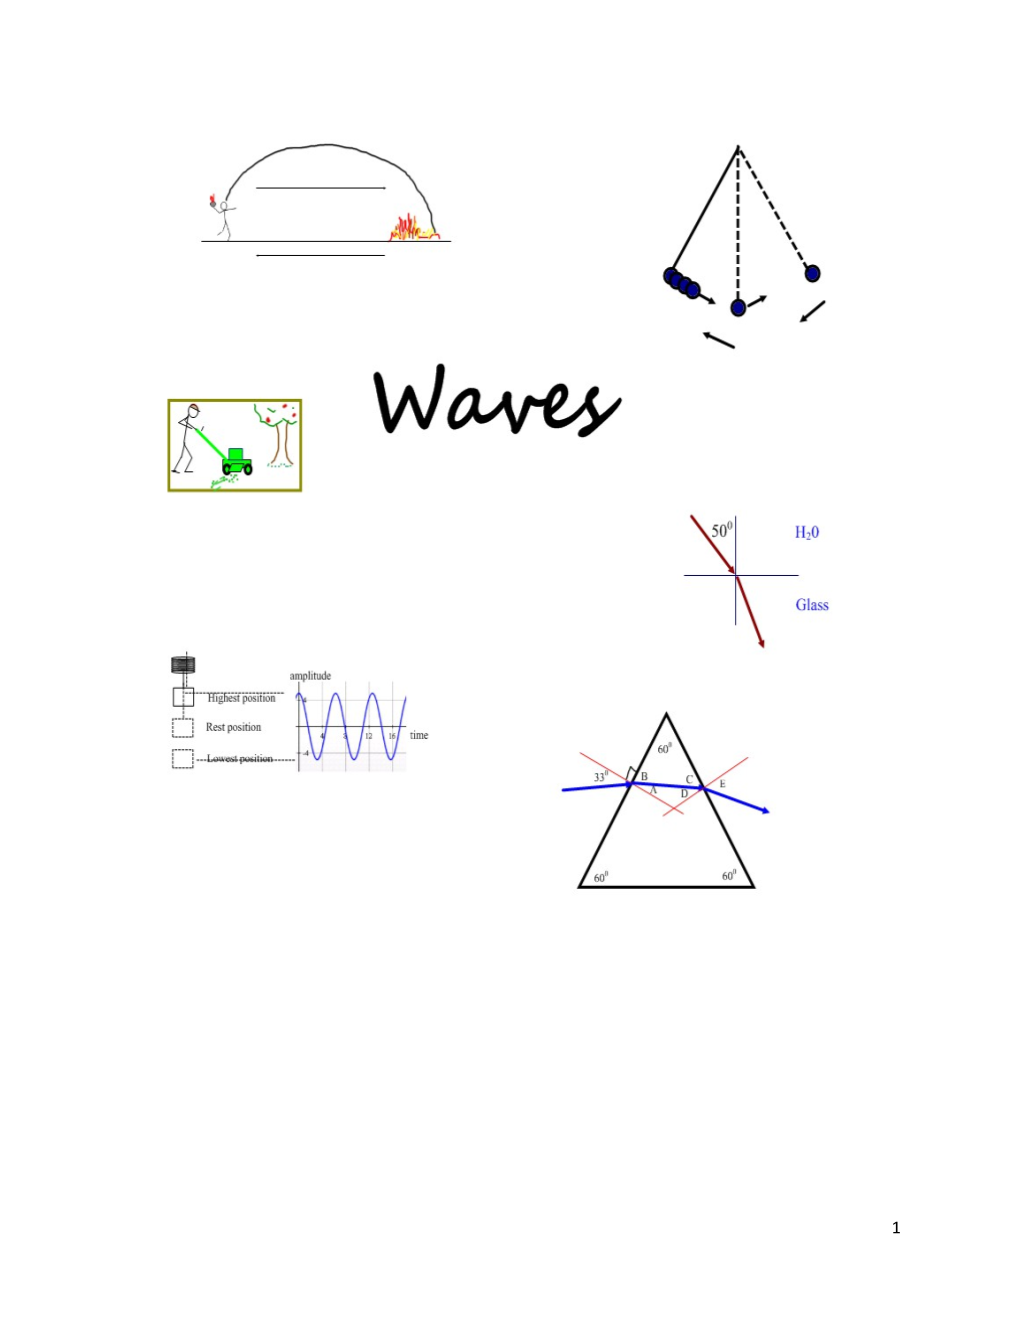 Unit 4 - Waves and Energy Transfer